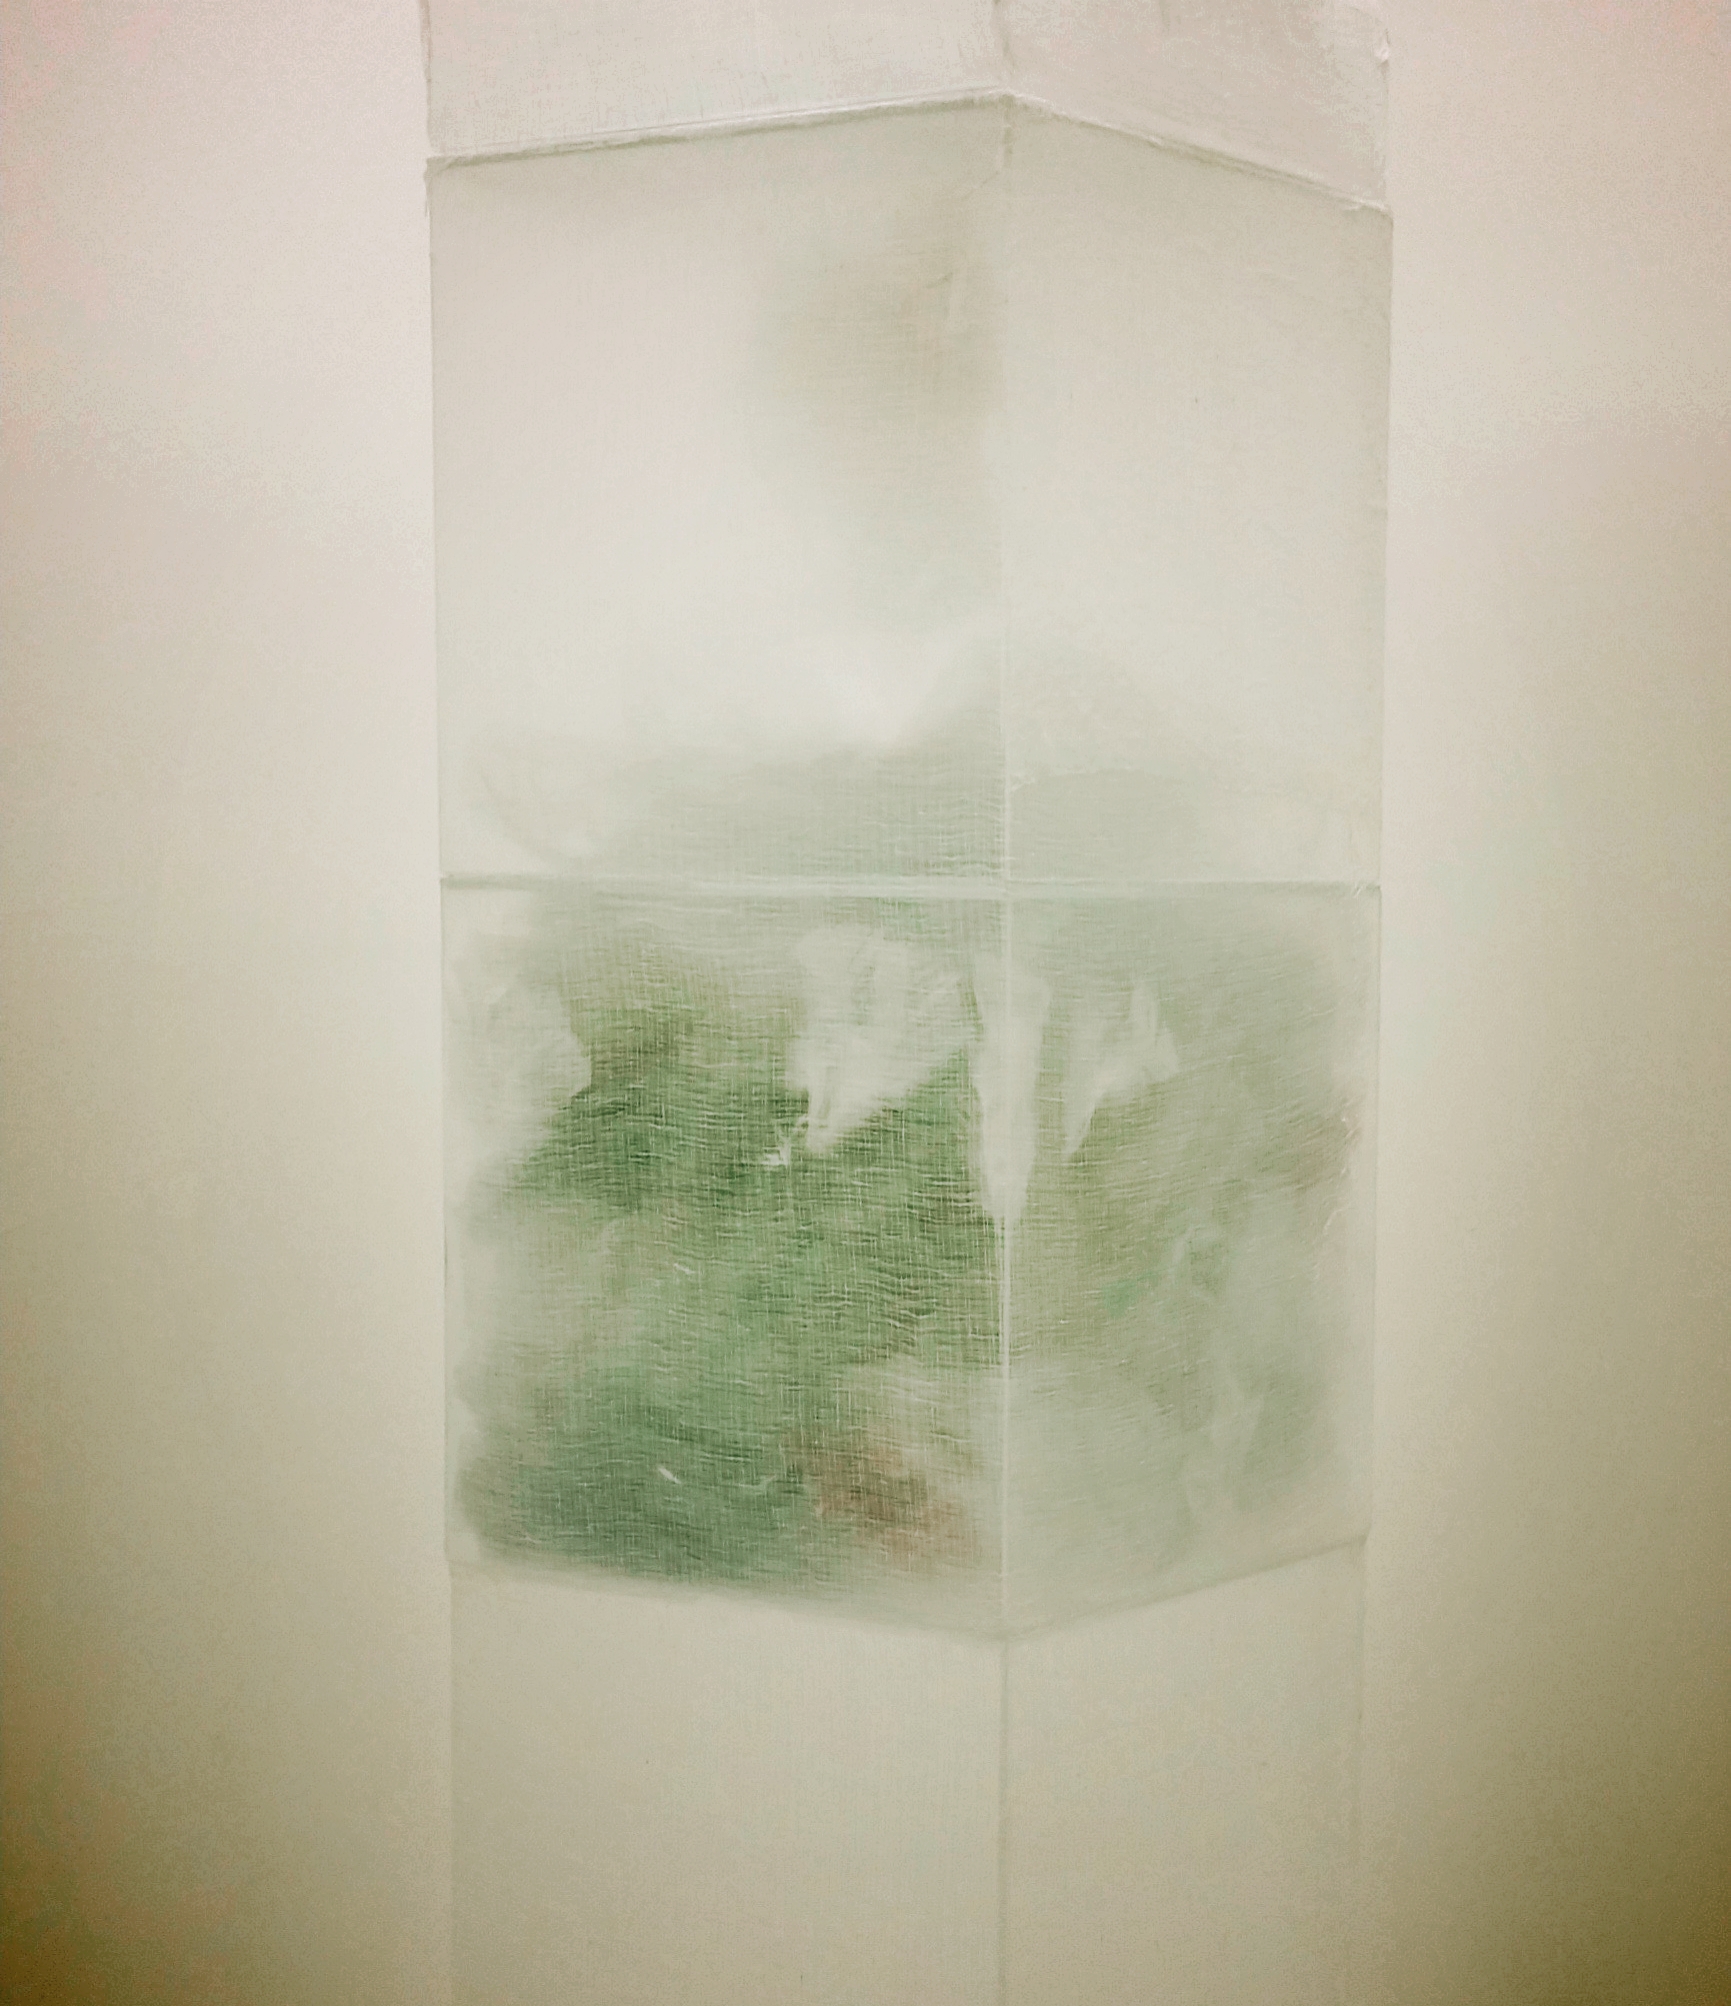  The Palace,&nbsp;2016 - detail 65 x 12 x 12 inches Acrylic cubes containing gauze, plastic and fragile materials 